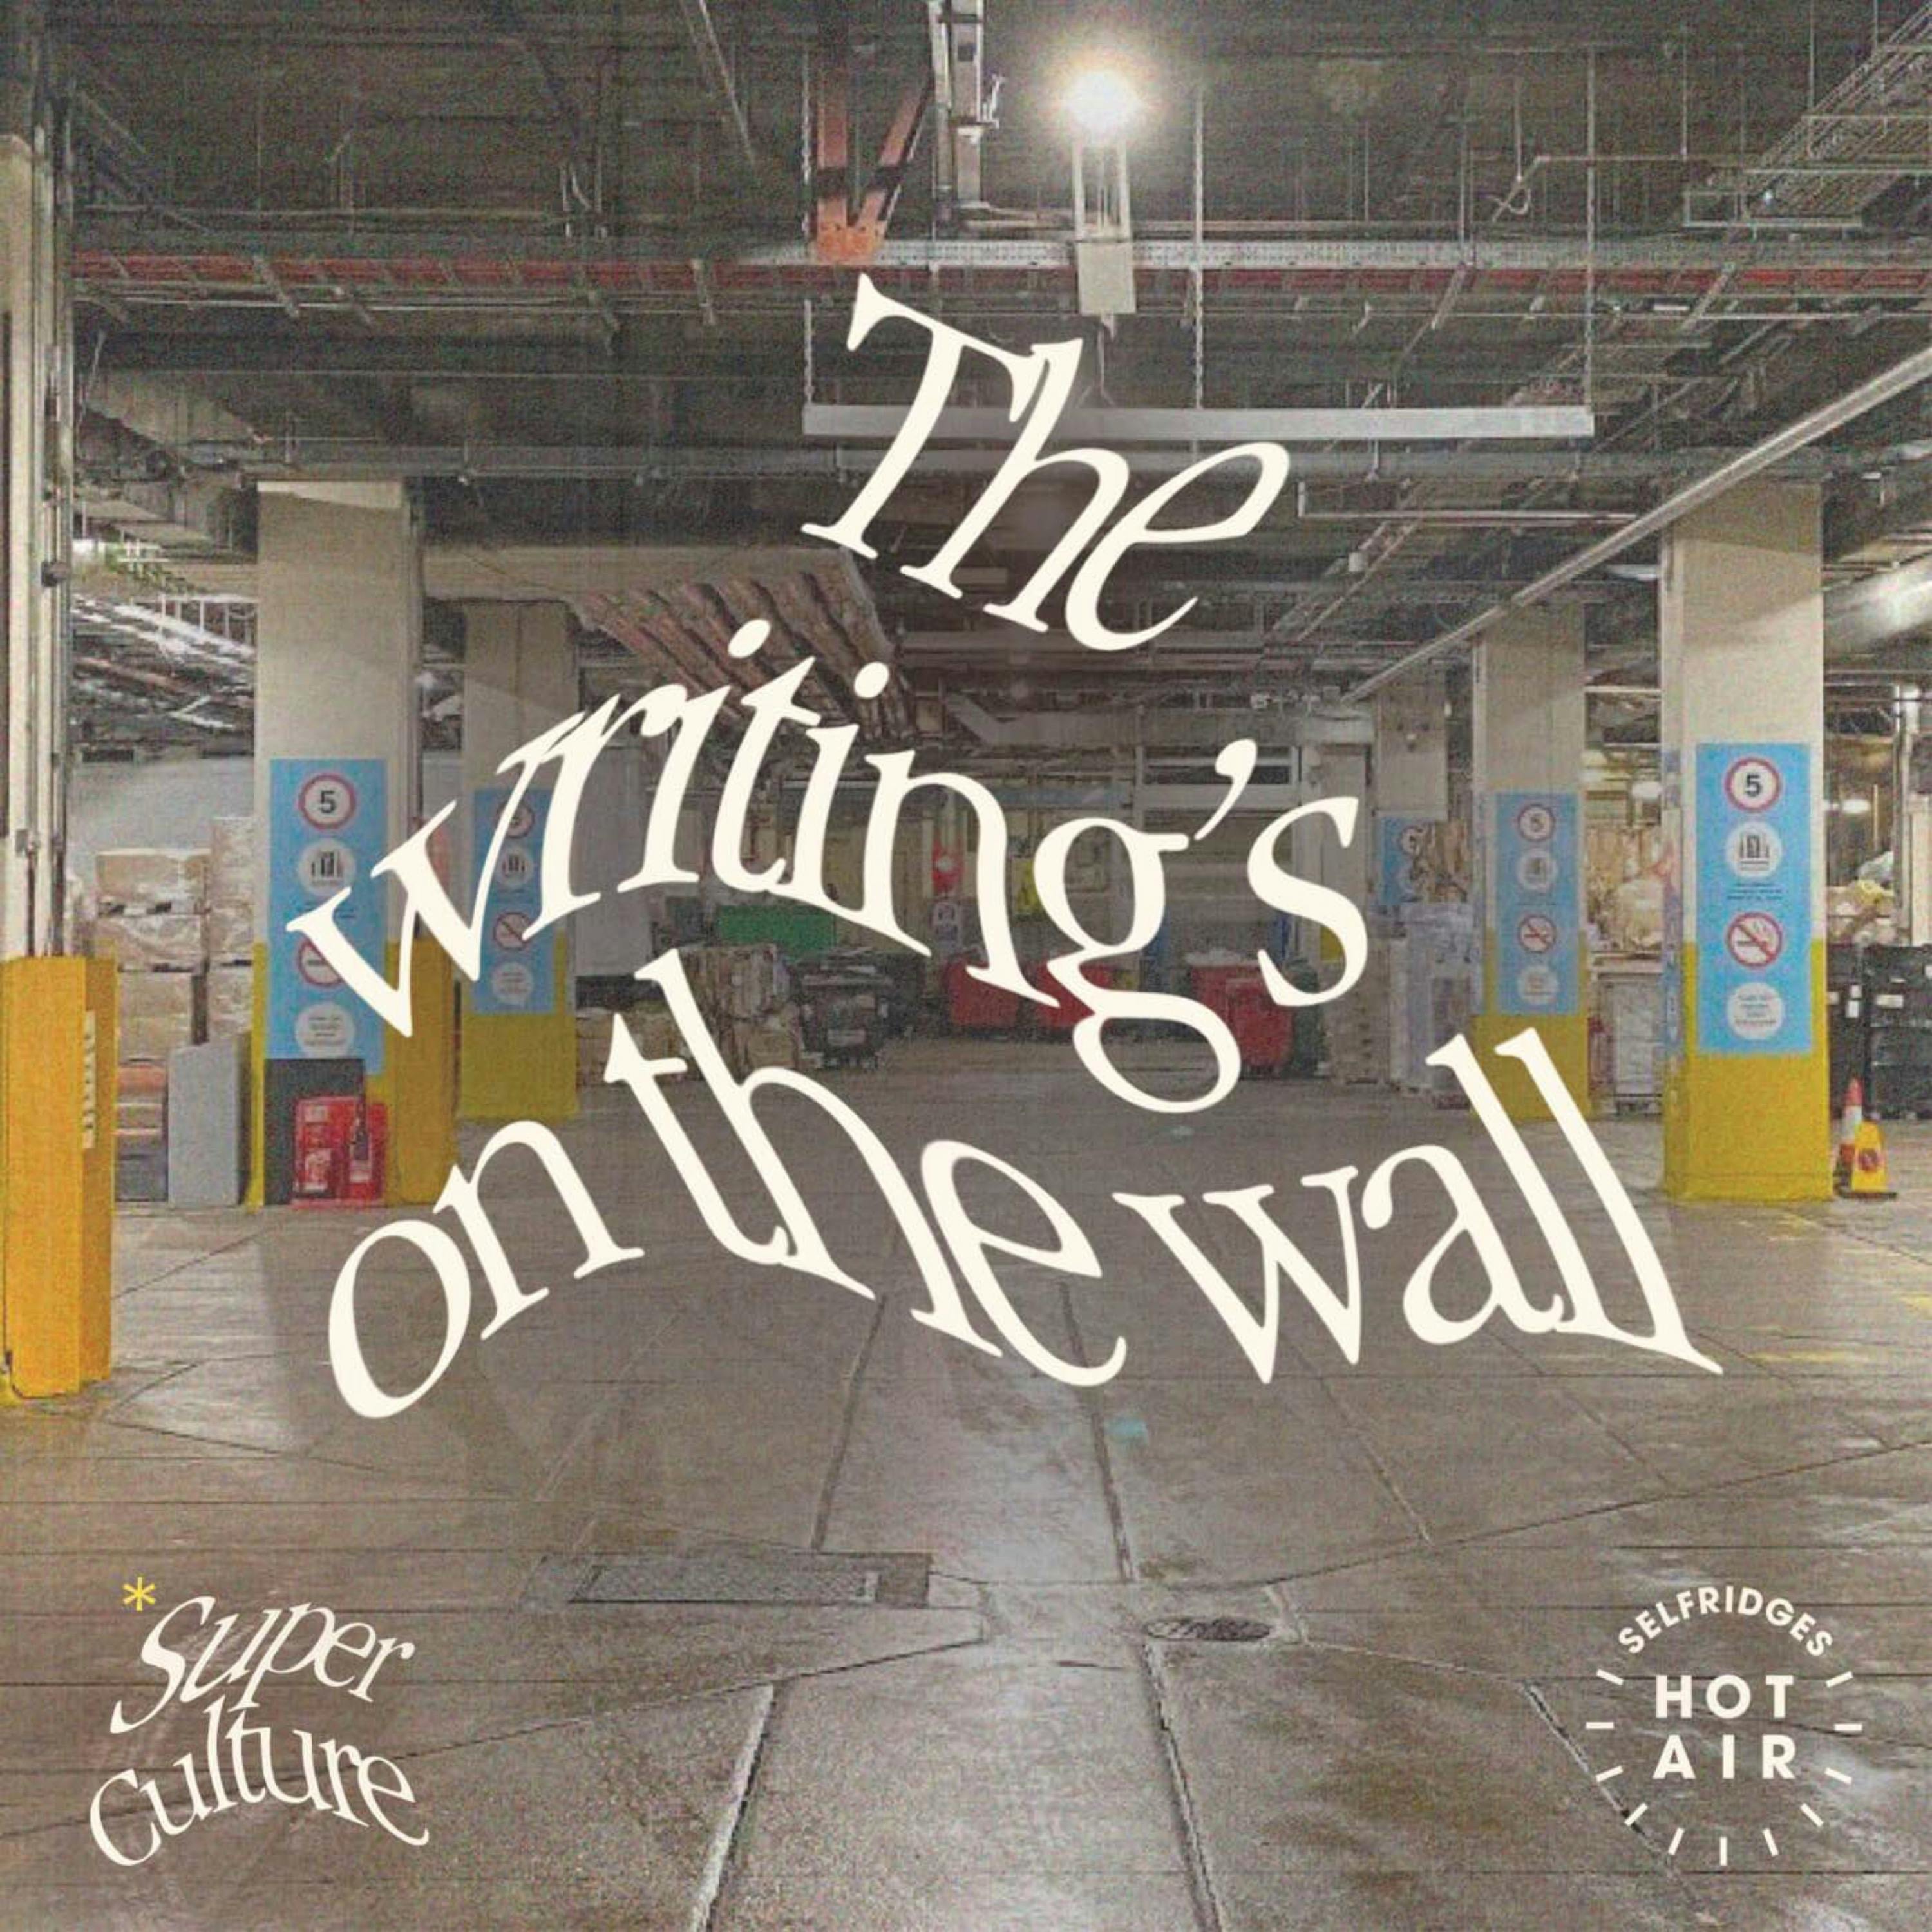 Super Culture: The writing's on the wall